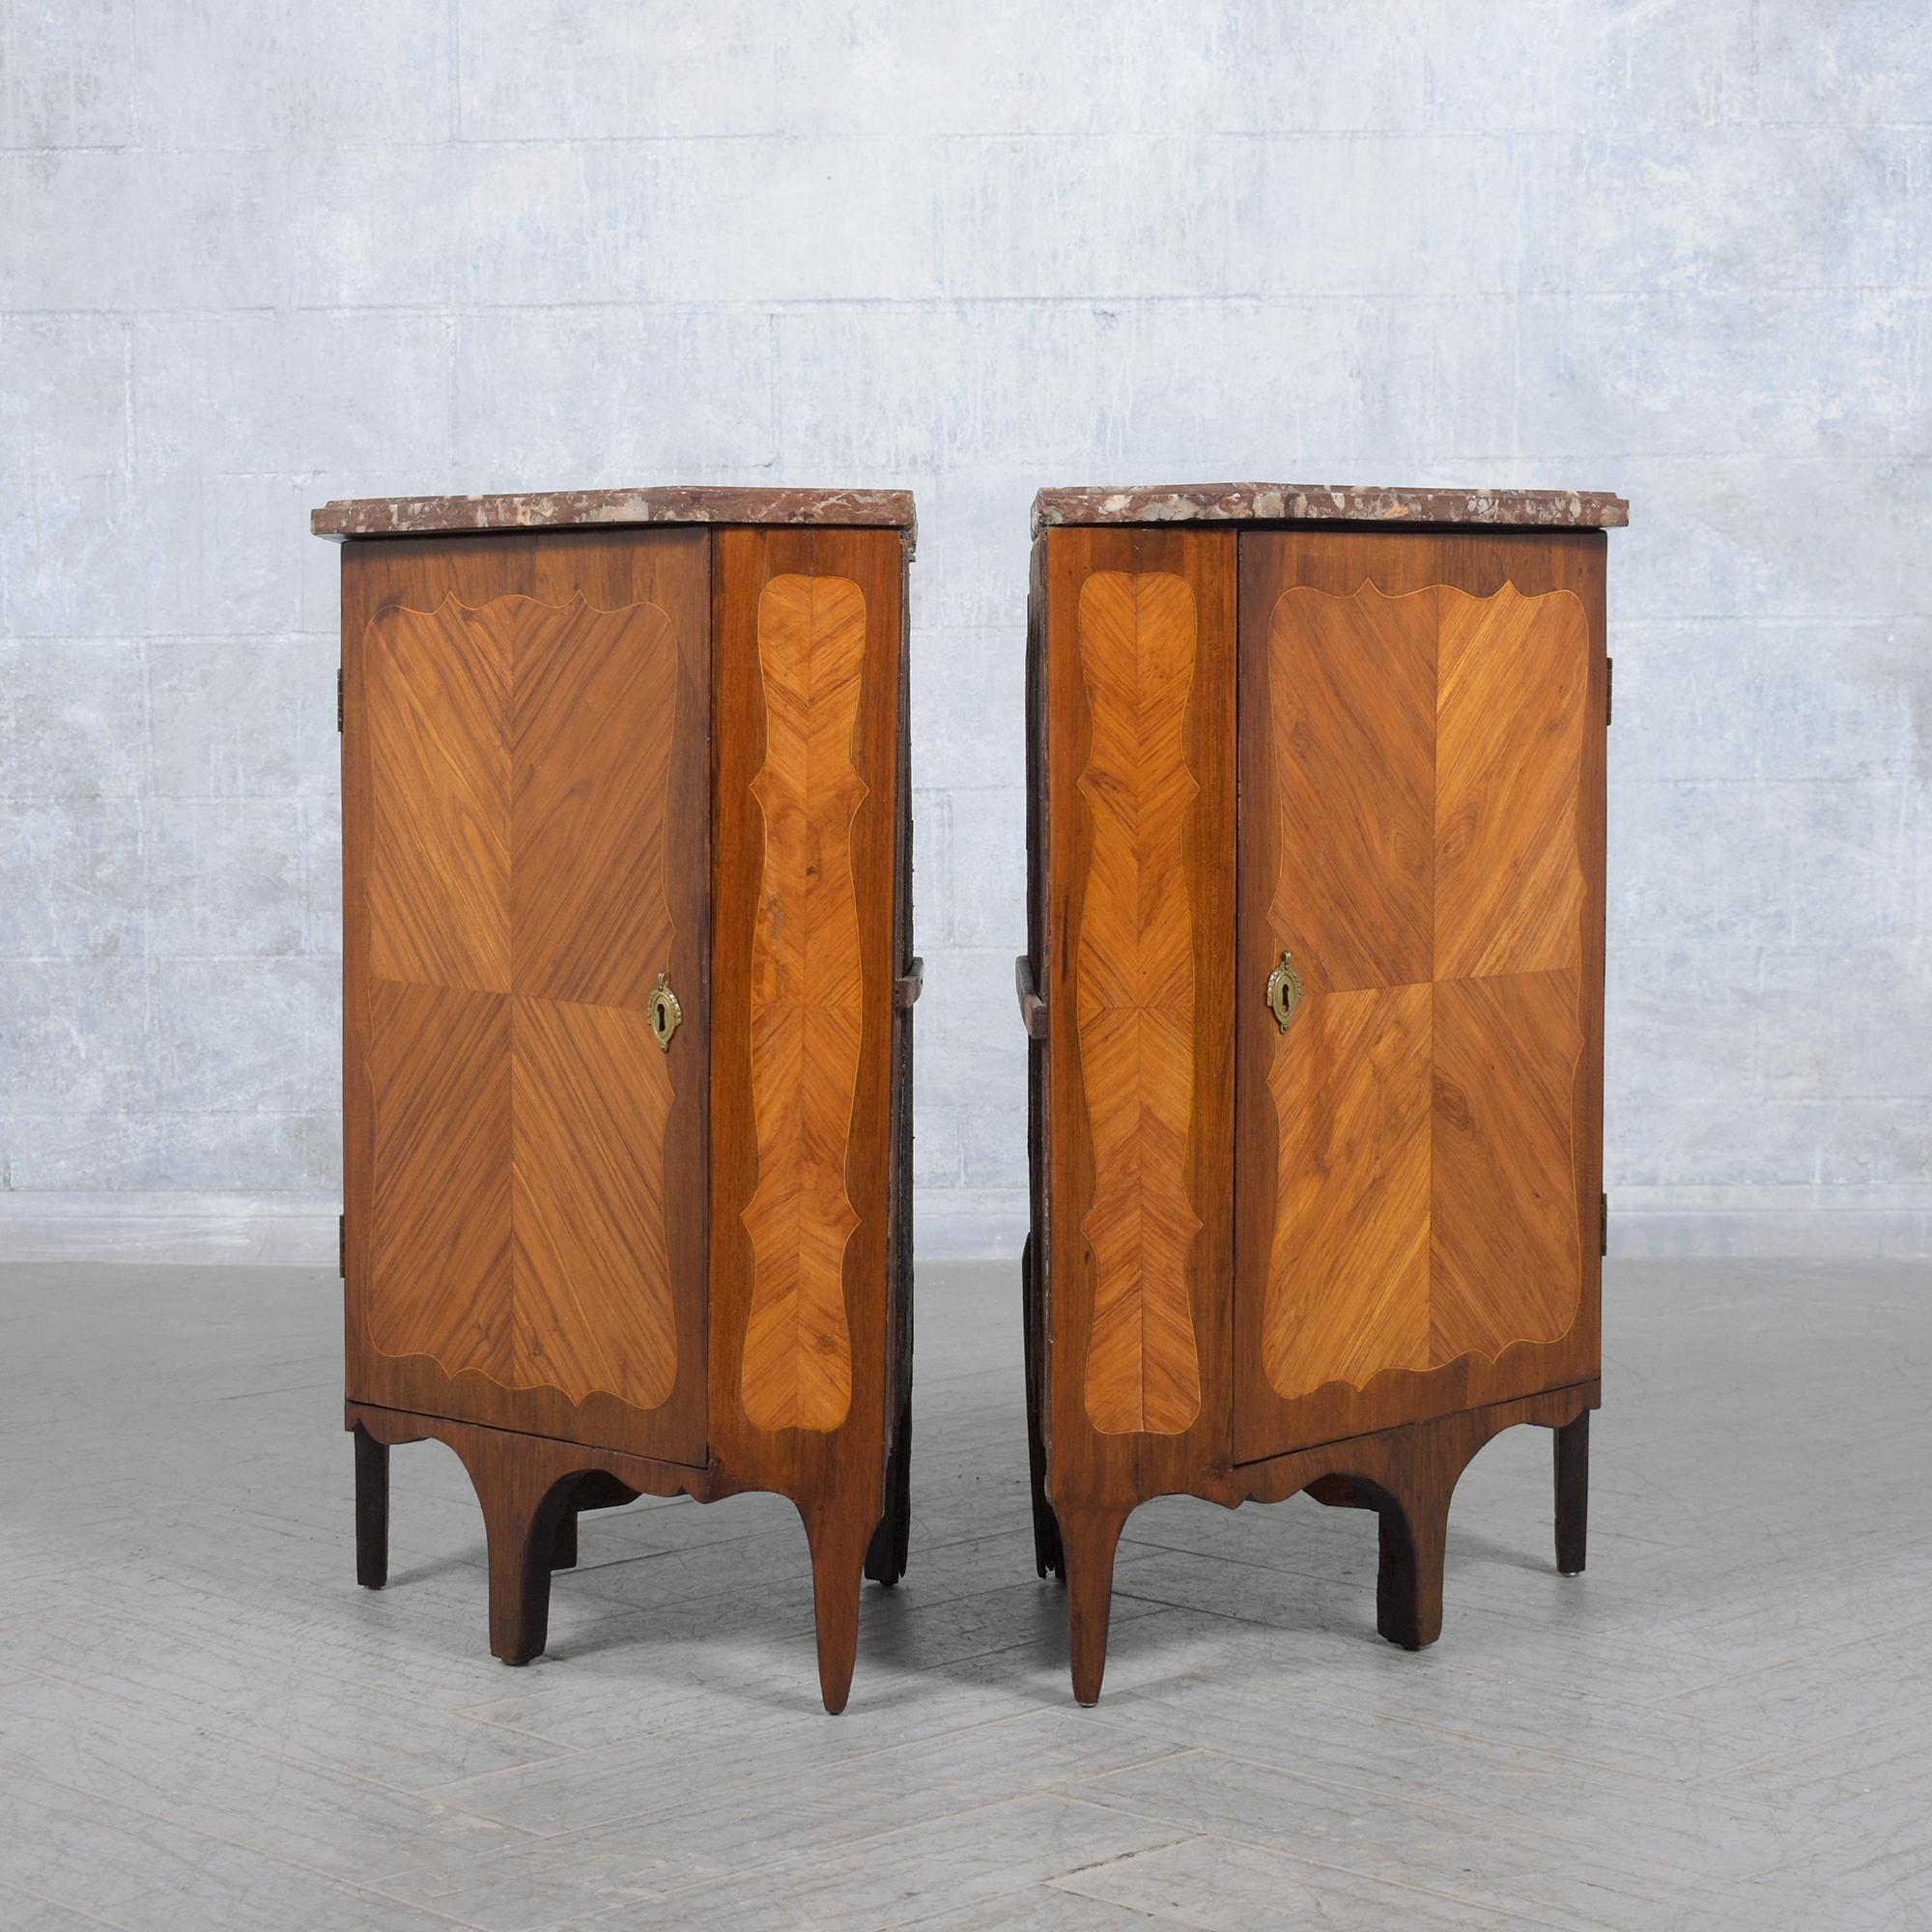 Late 18th-Century French Corner Cabinets with Marble Tops: Restored Elegance For Sale 3